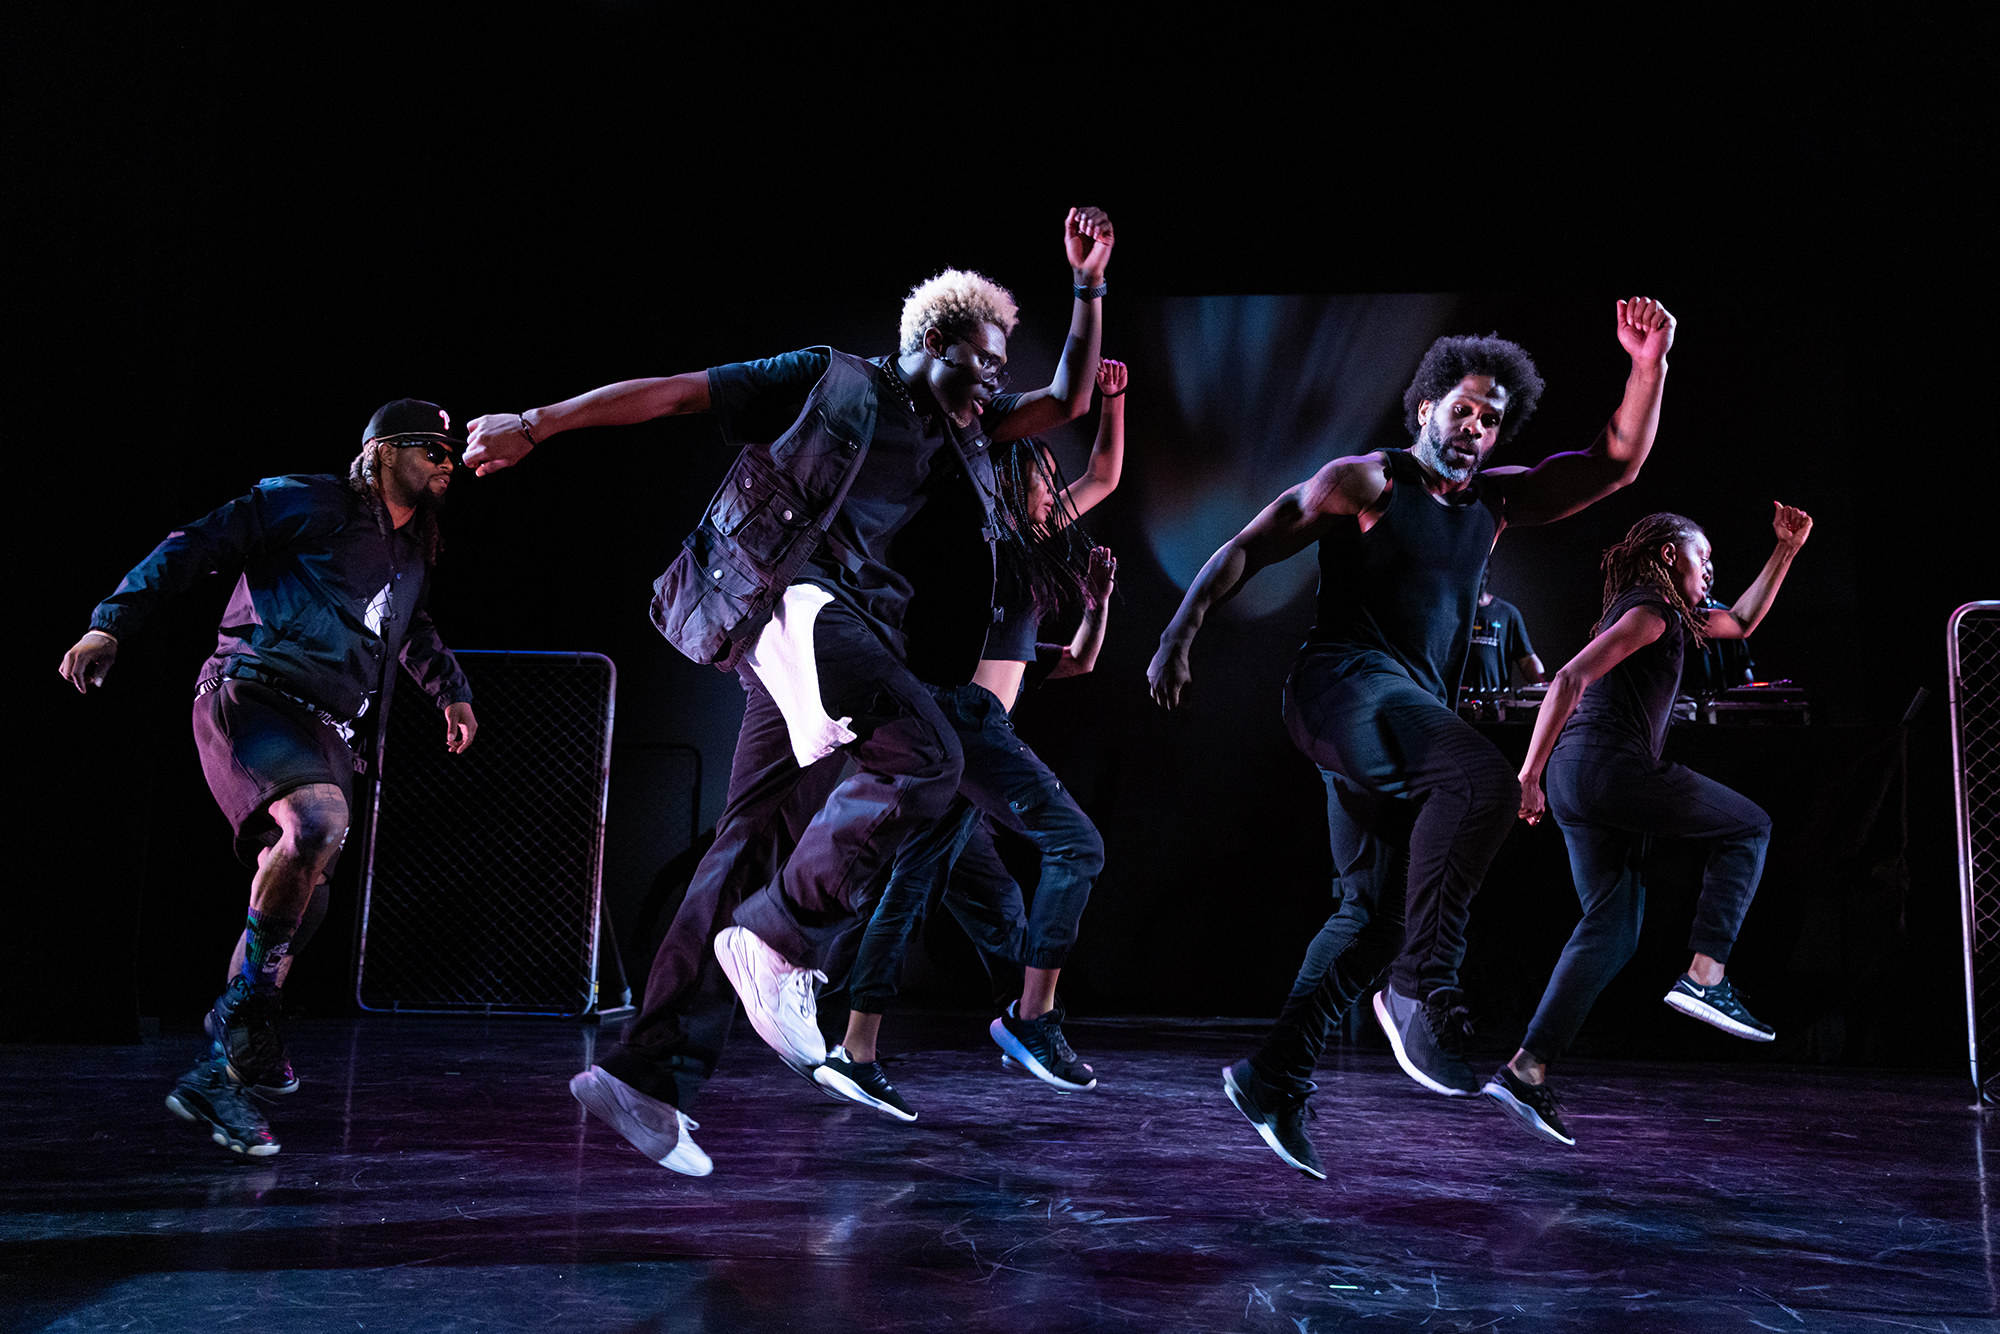 A five-person dance troupe performing on stage.